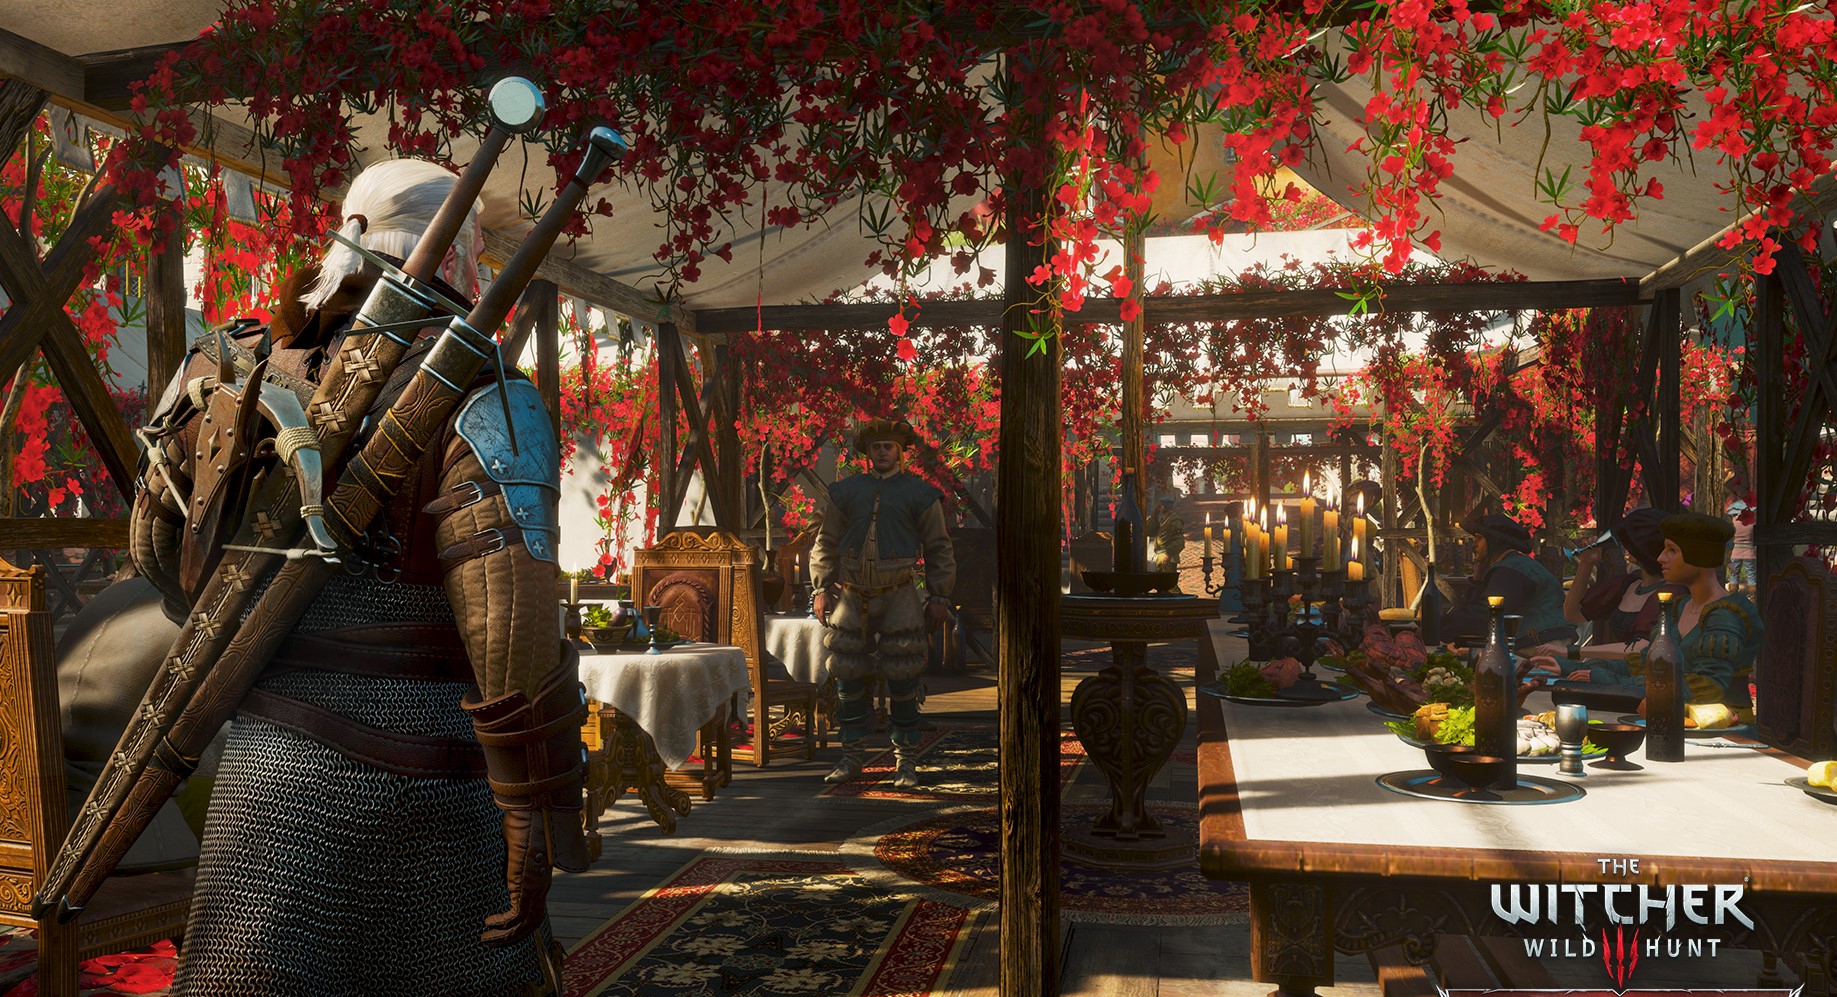 An outdoor feast in The Witcher 3: Wild Hunt